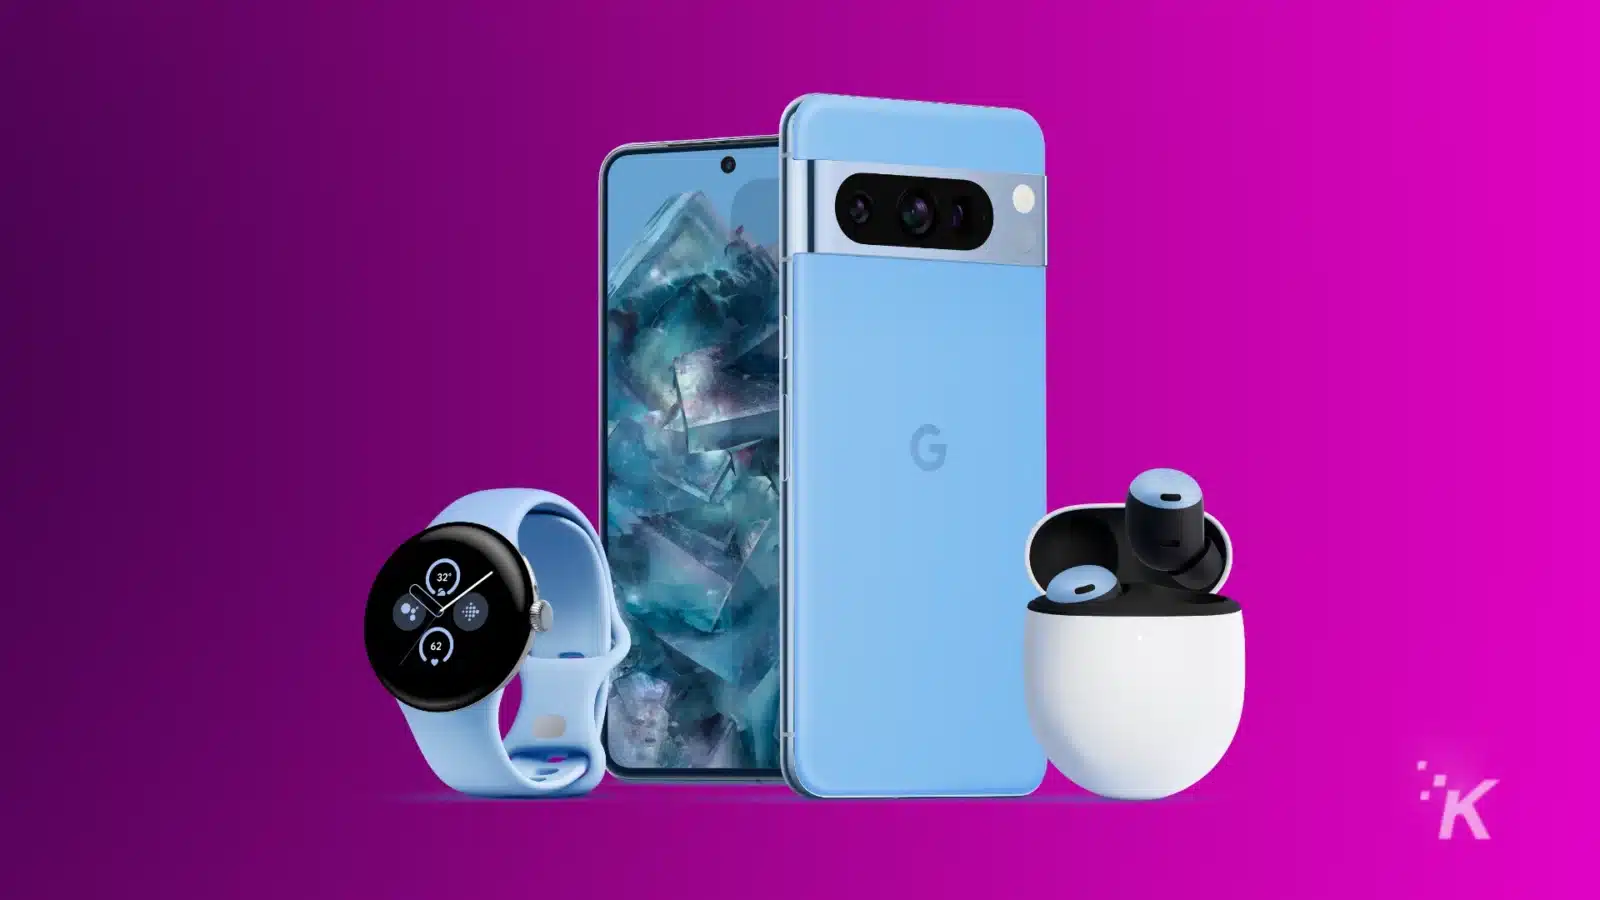 Google pixel 8 and 8 pro smartphones, pixel watch 2 smartwatch and buds pro earbuds on a purple background